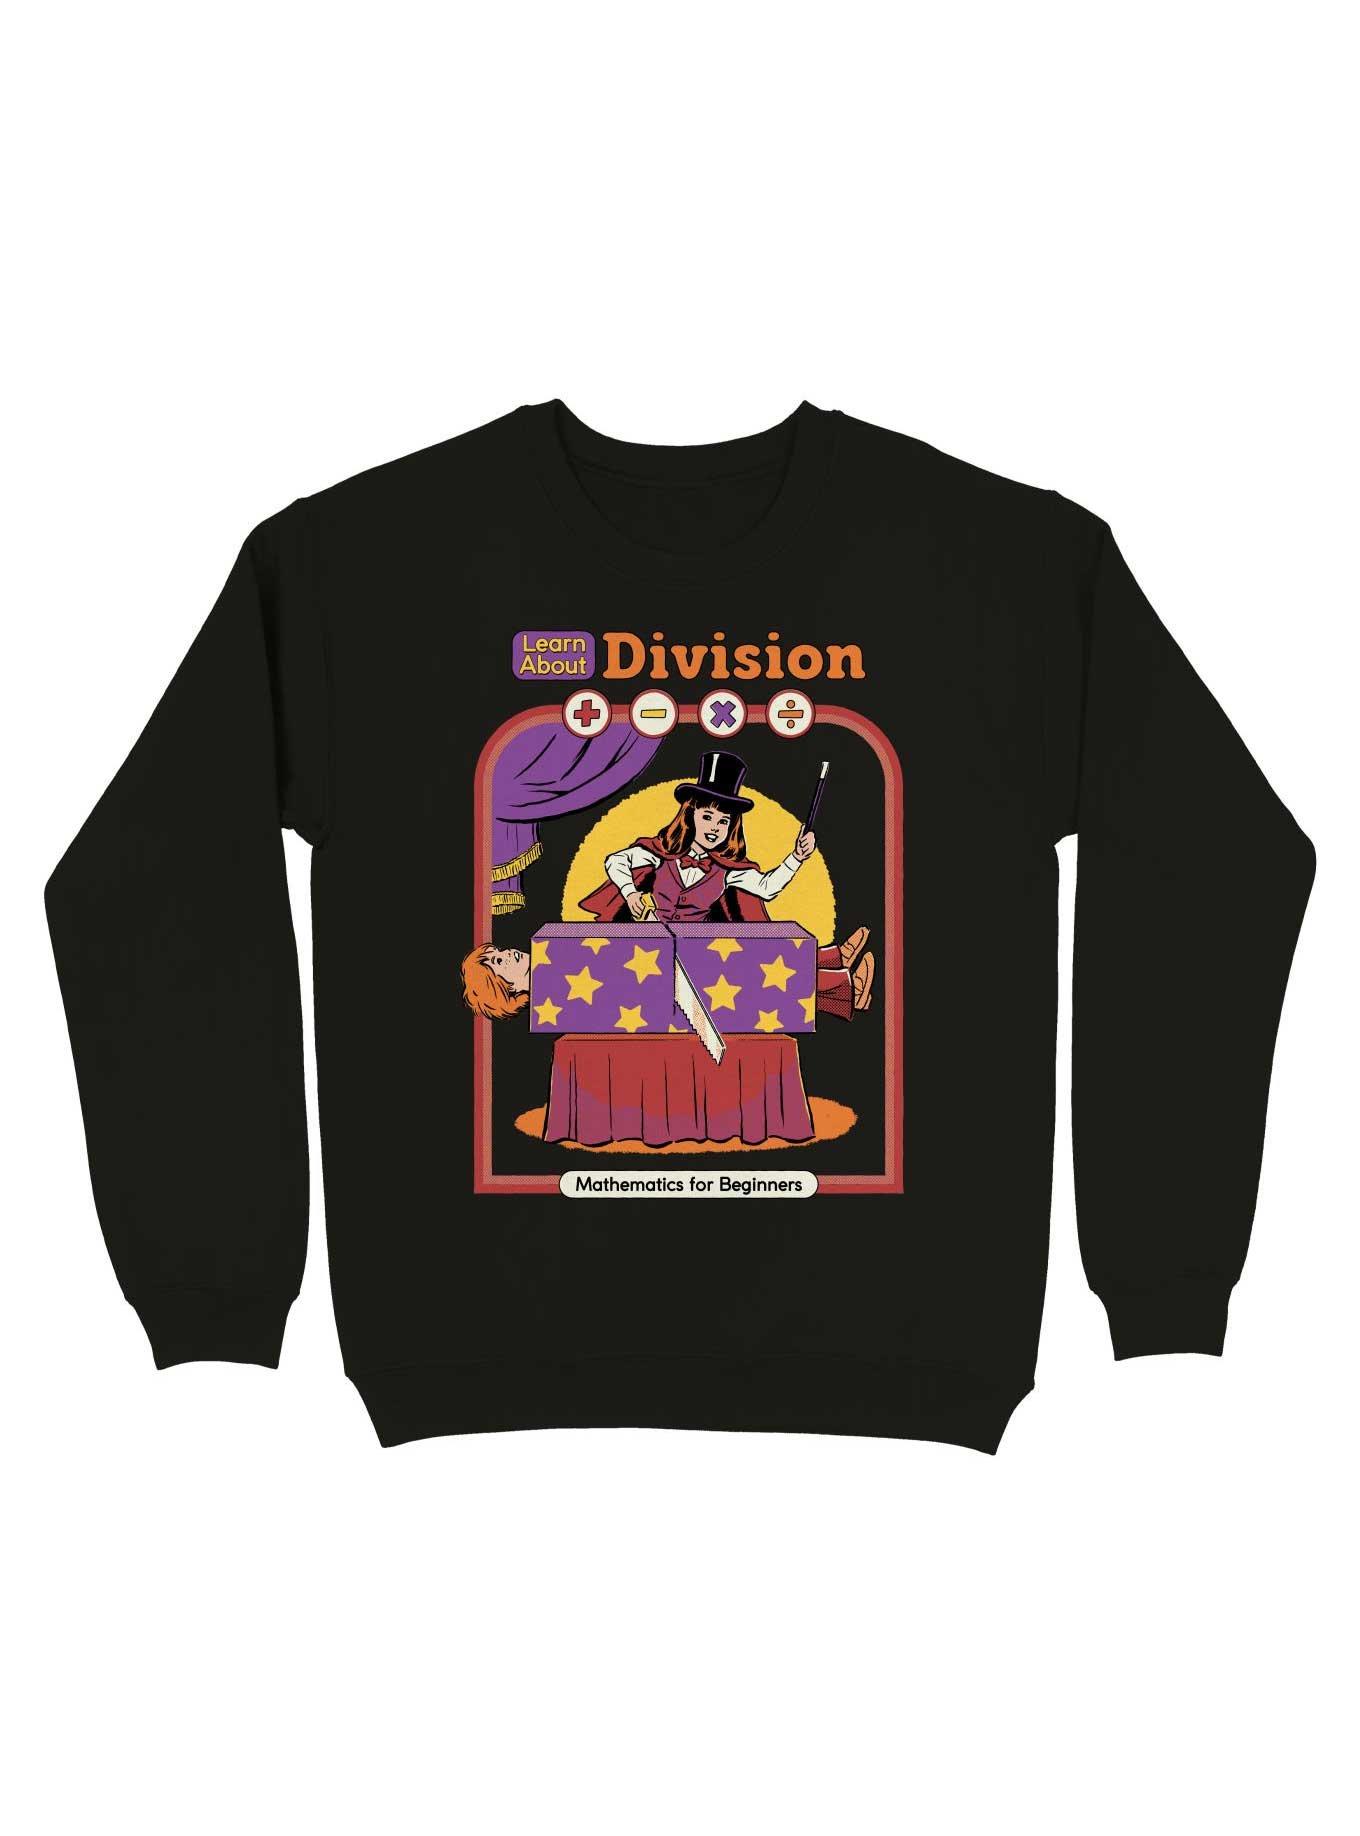 Learn About Division Sweatshirt By Steven Rhodes